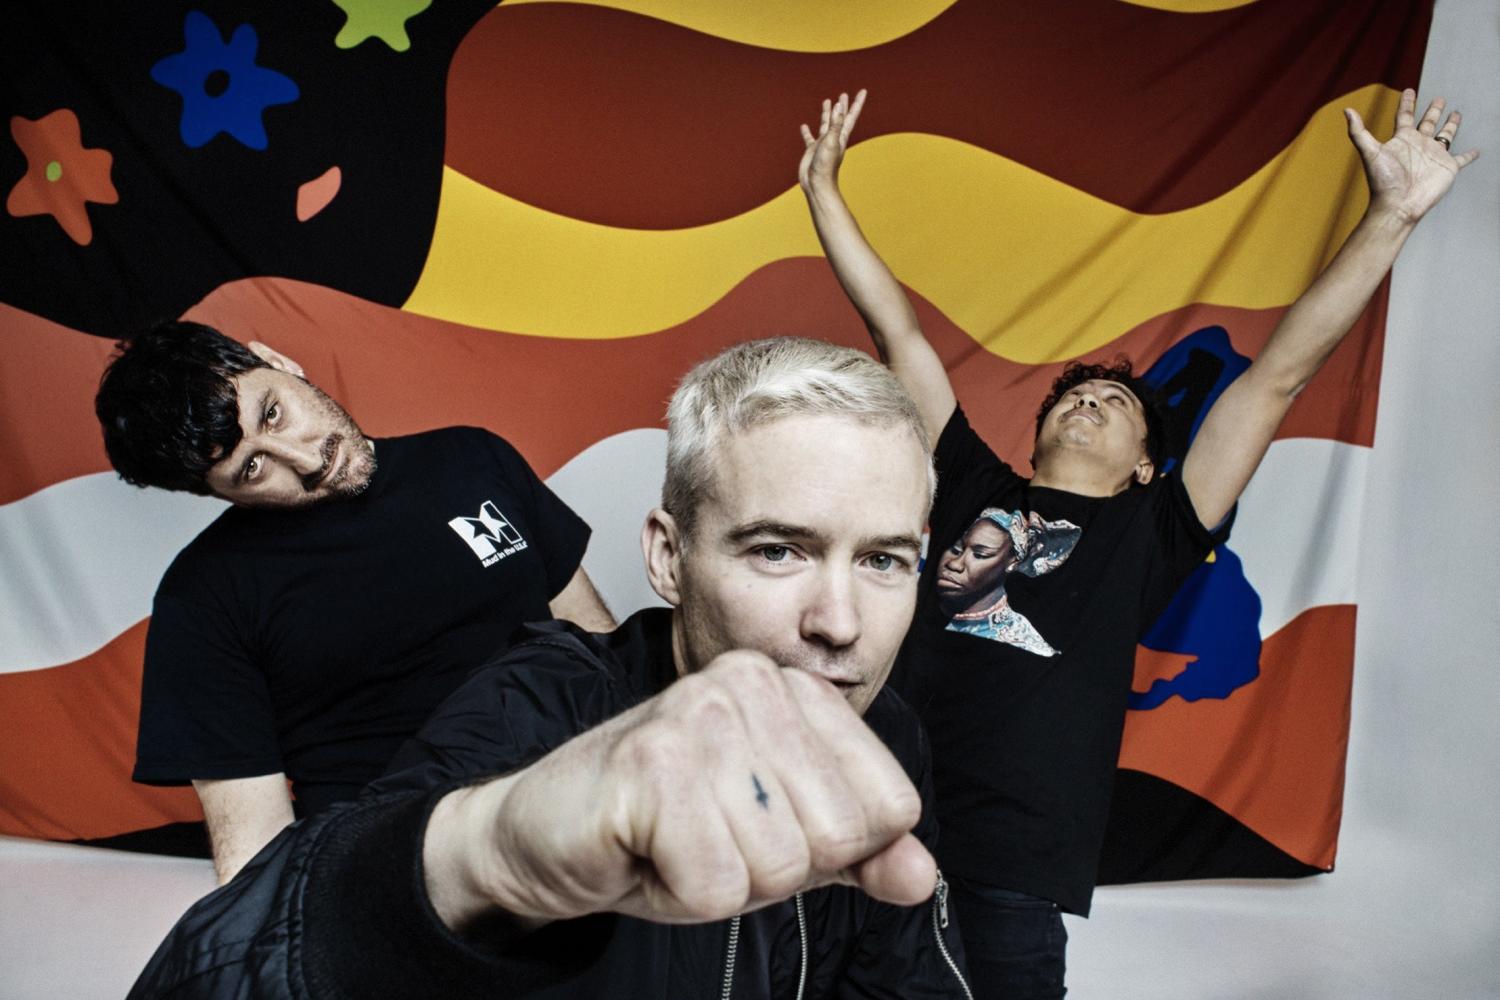 NEWS: The Avalanches stream new song ‘Subways’